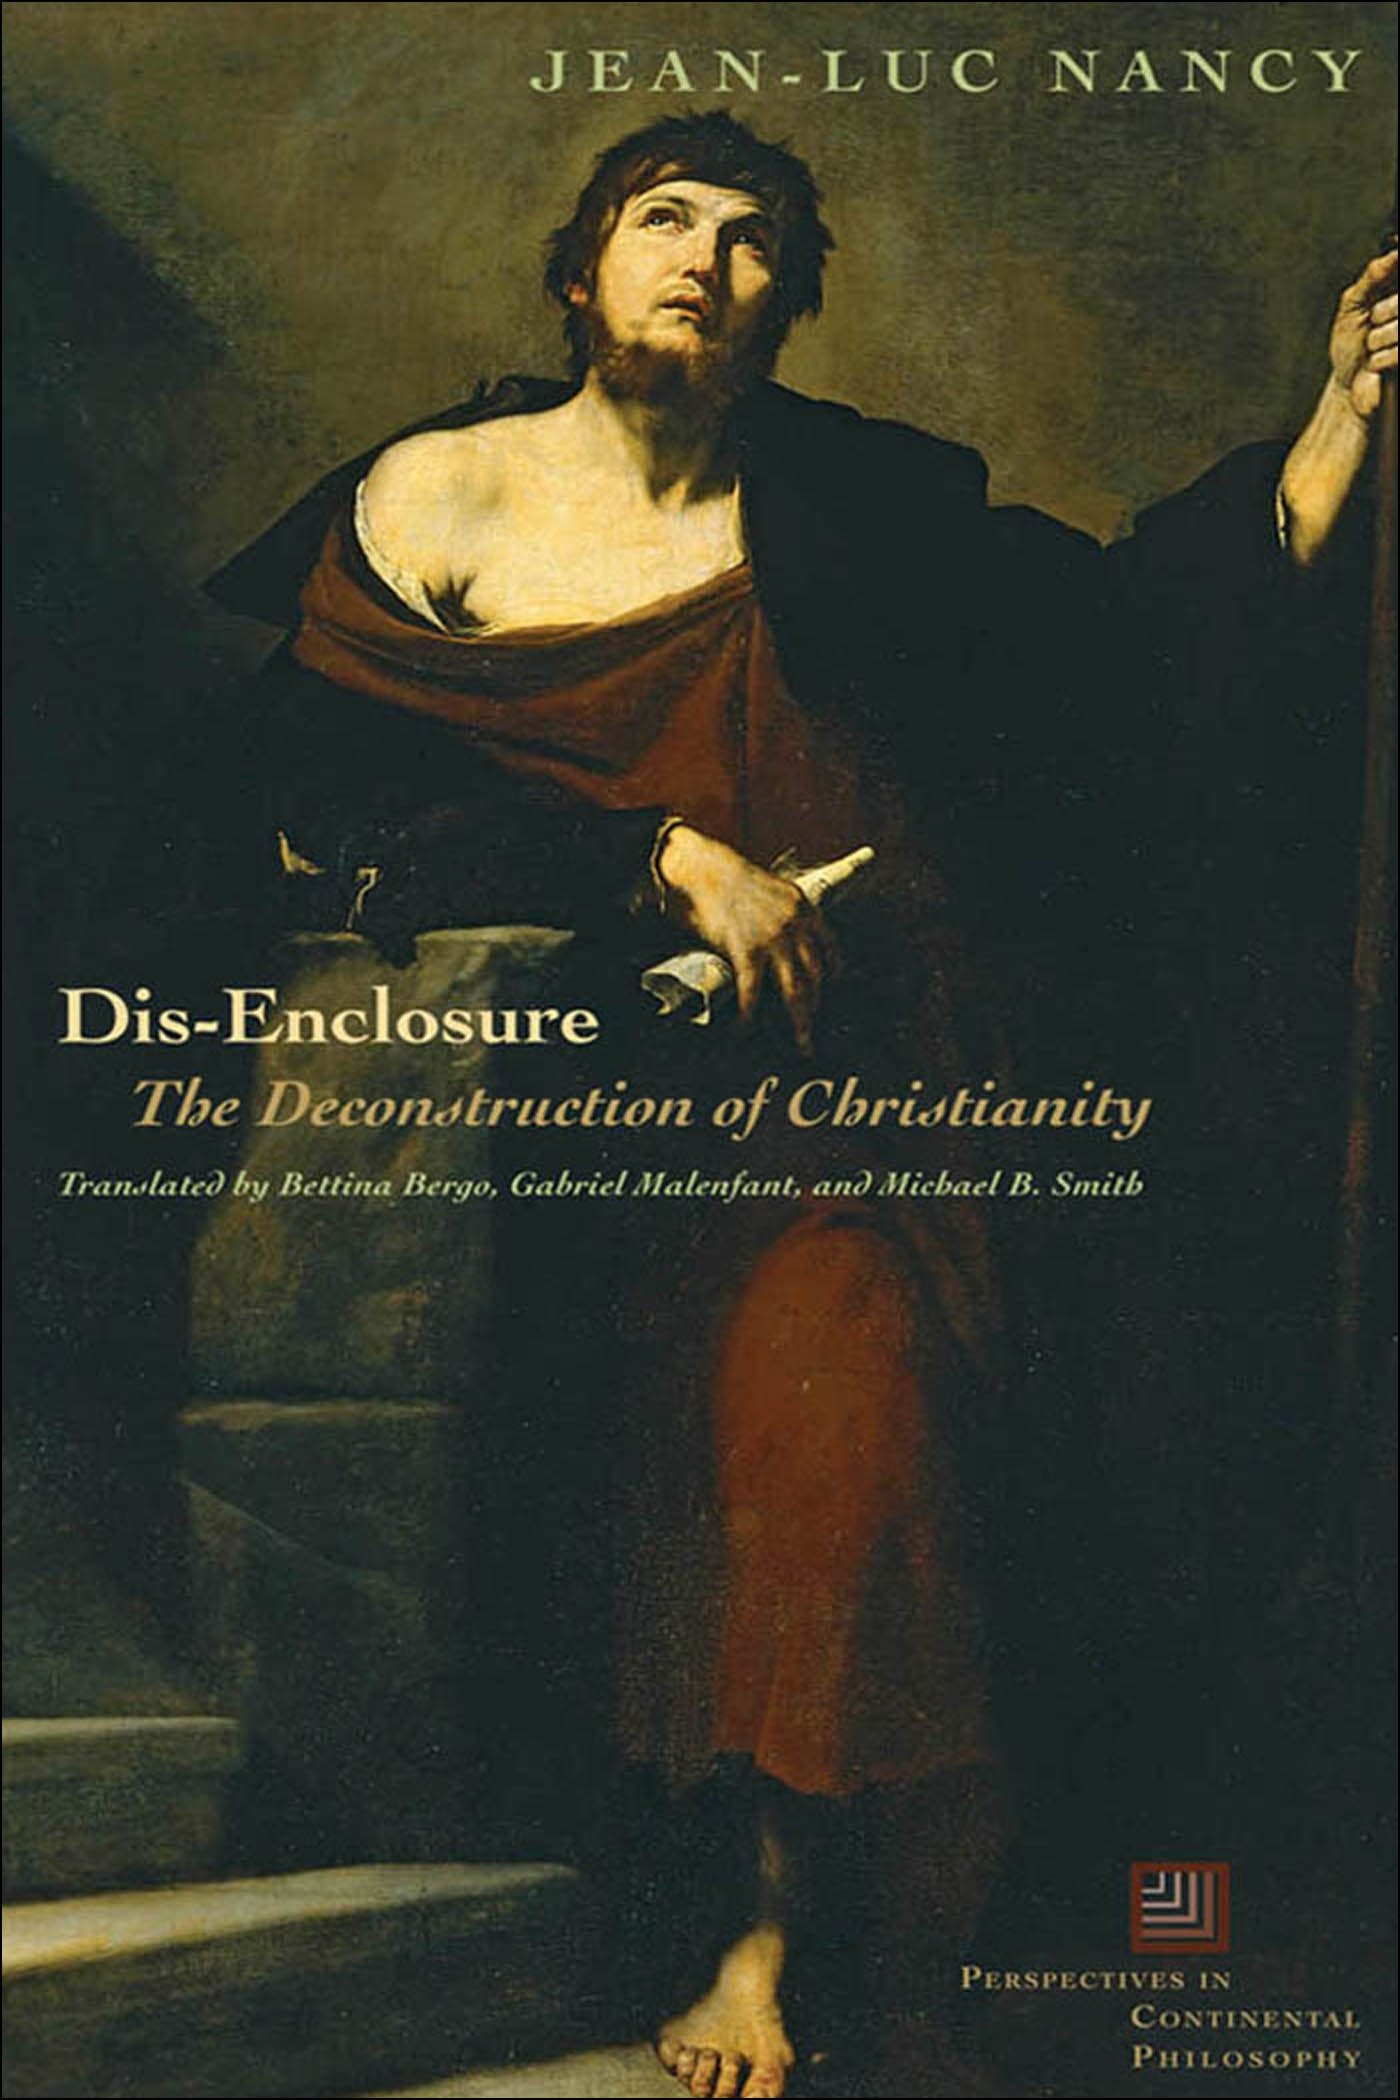 Dis-Enclosure: The Deconstruction of Christianity